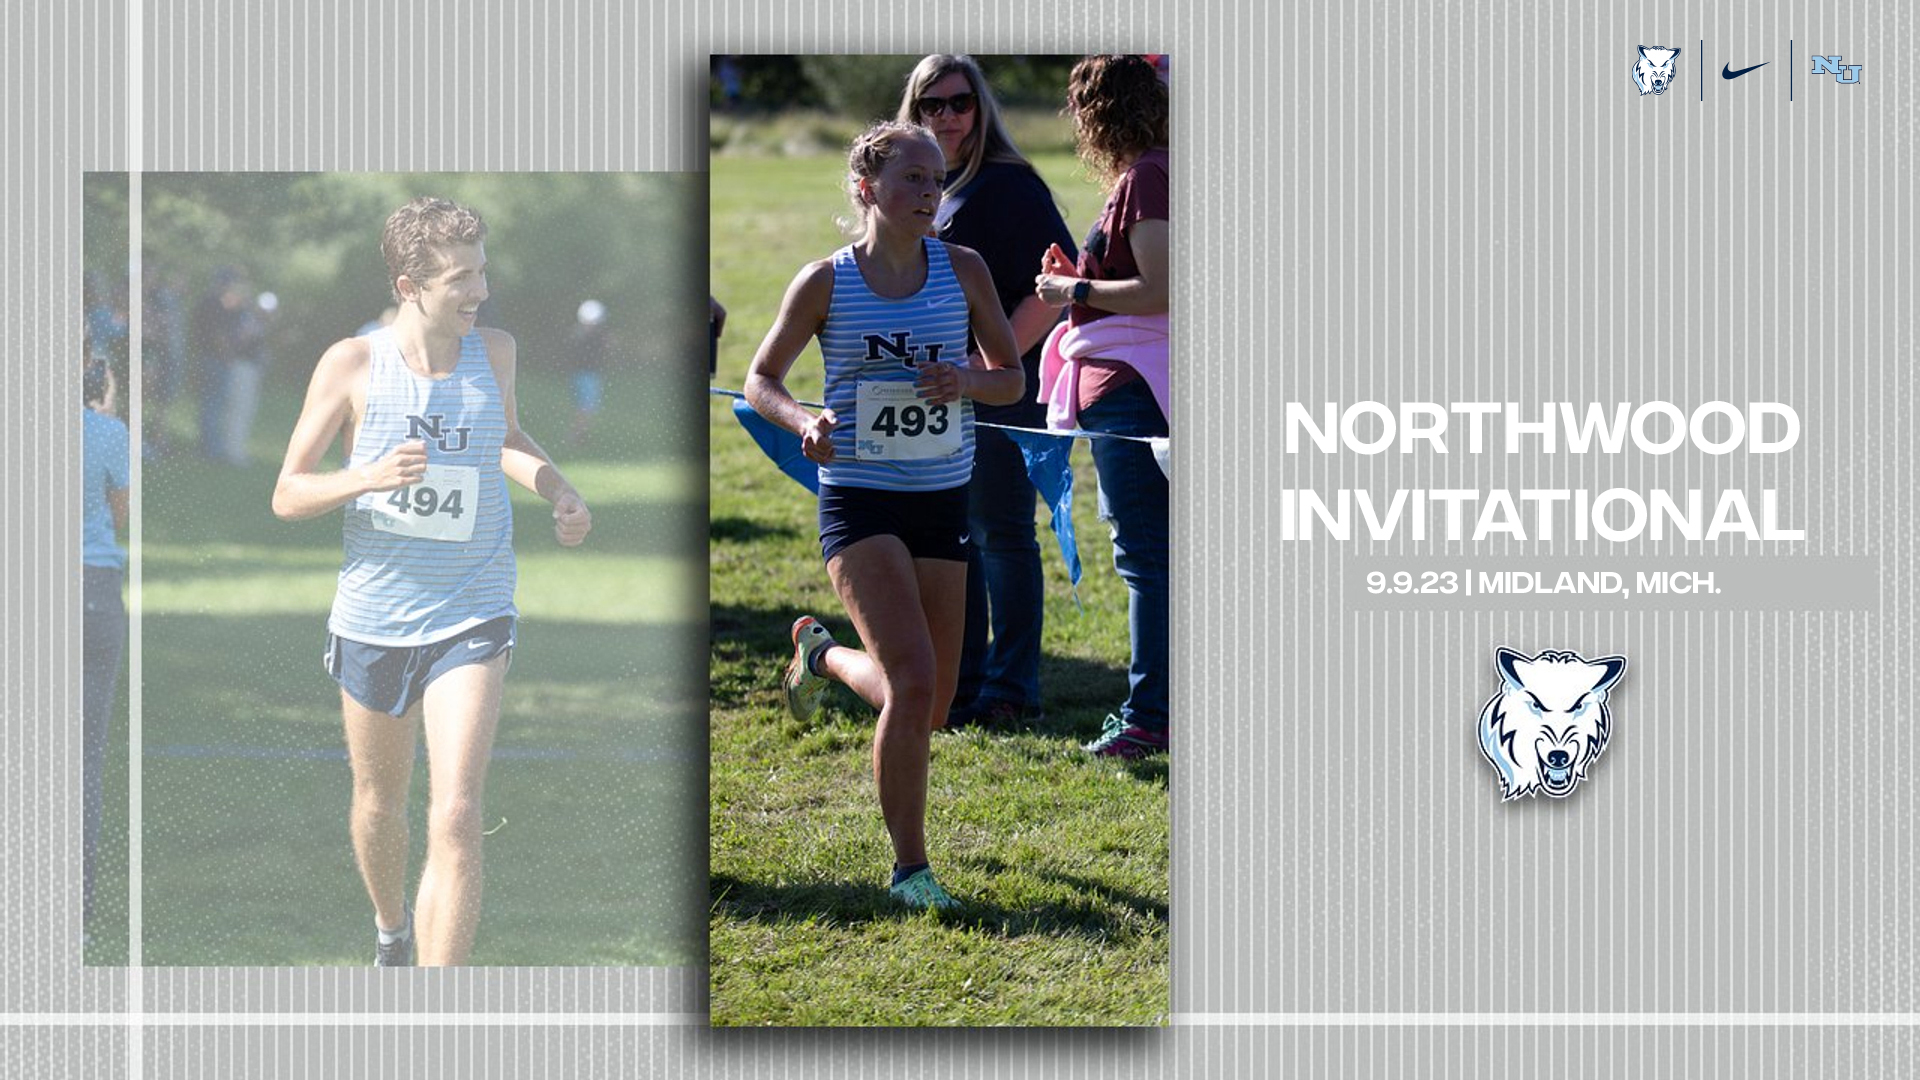 Cross Country Shows Out At The Northwood Invitational